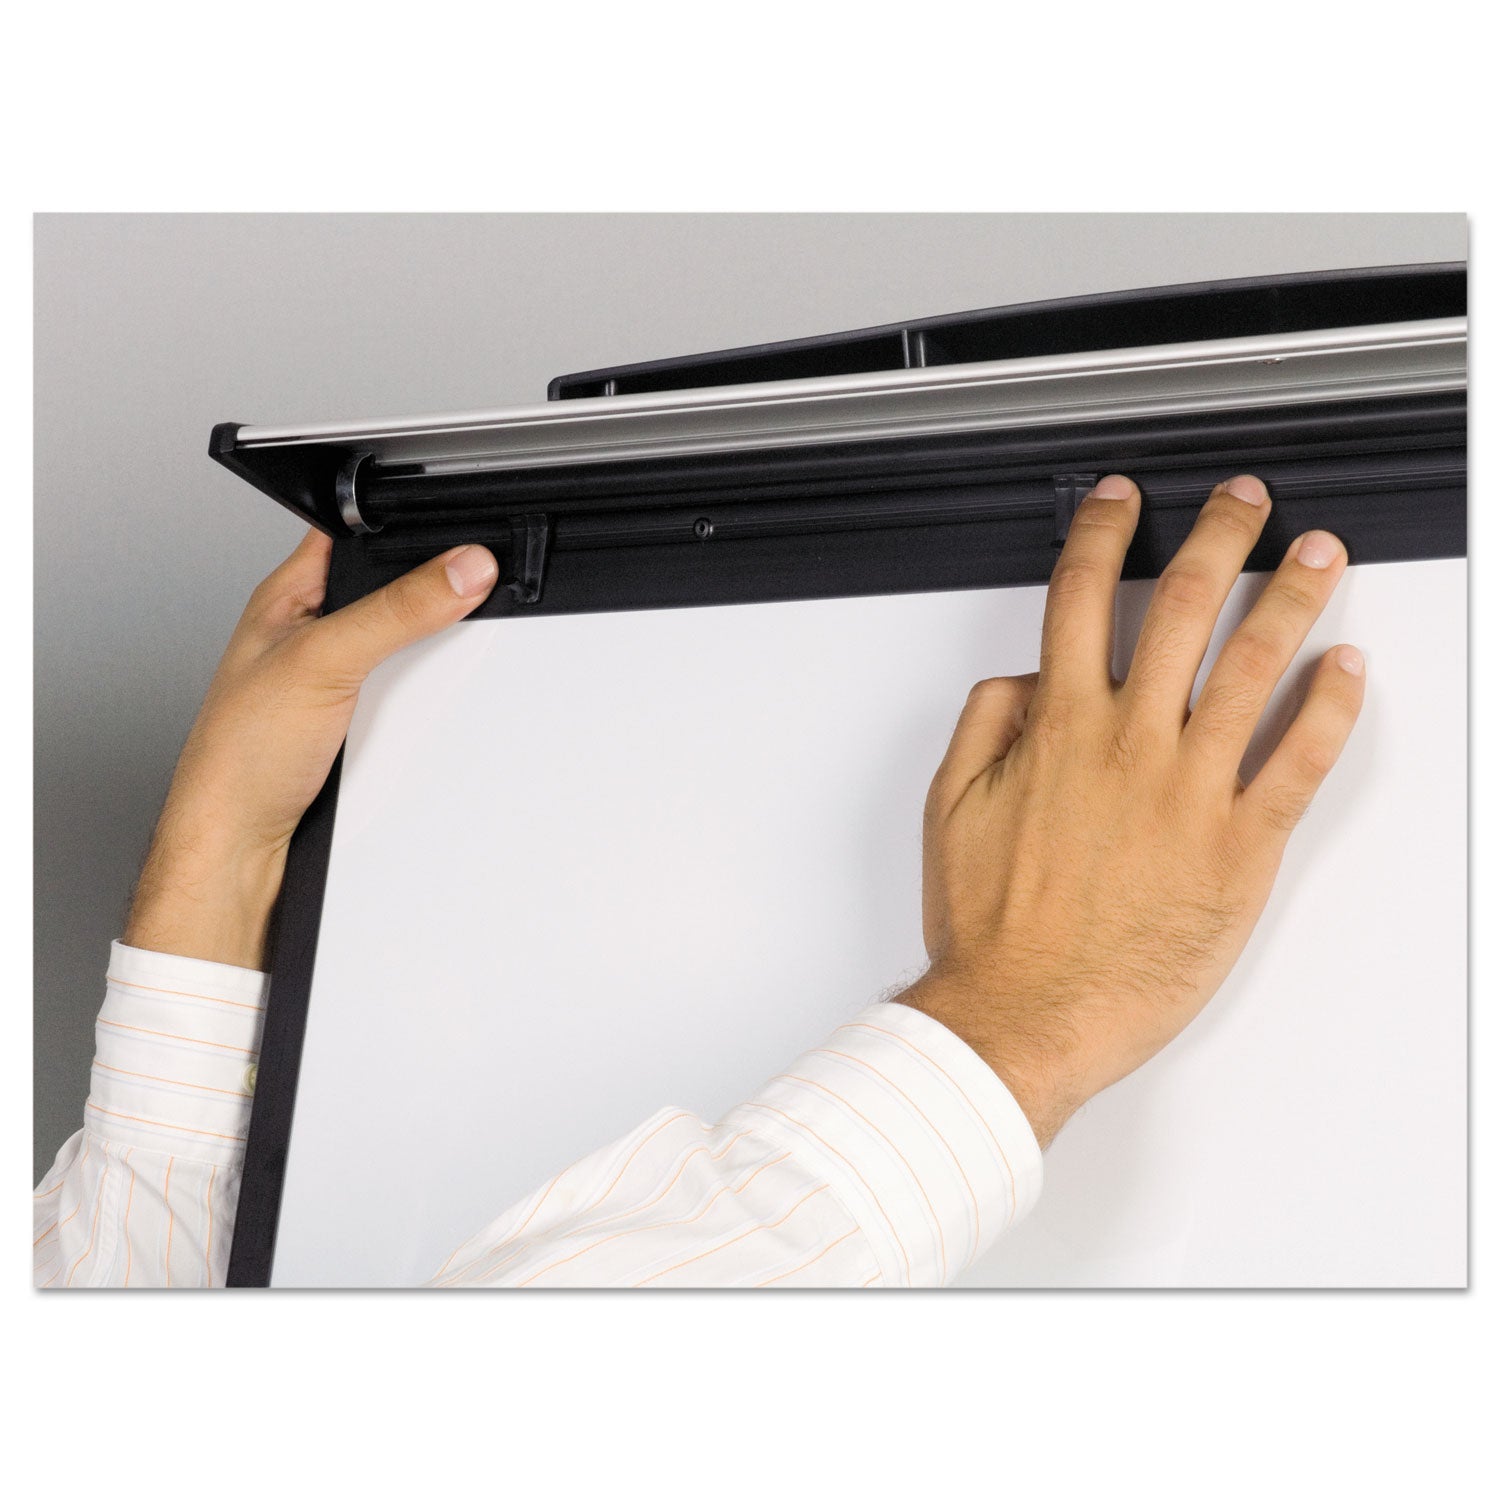 Tripod Extension Bar Magnetic Dry-Erase Easel, 69" to 78" High, Black/Silver - 